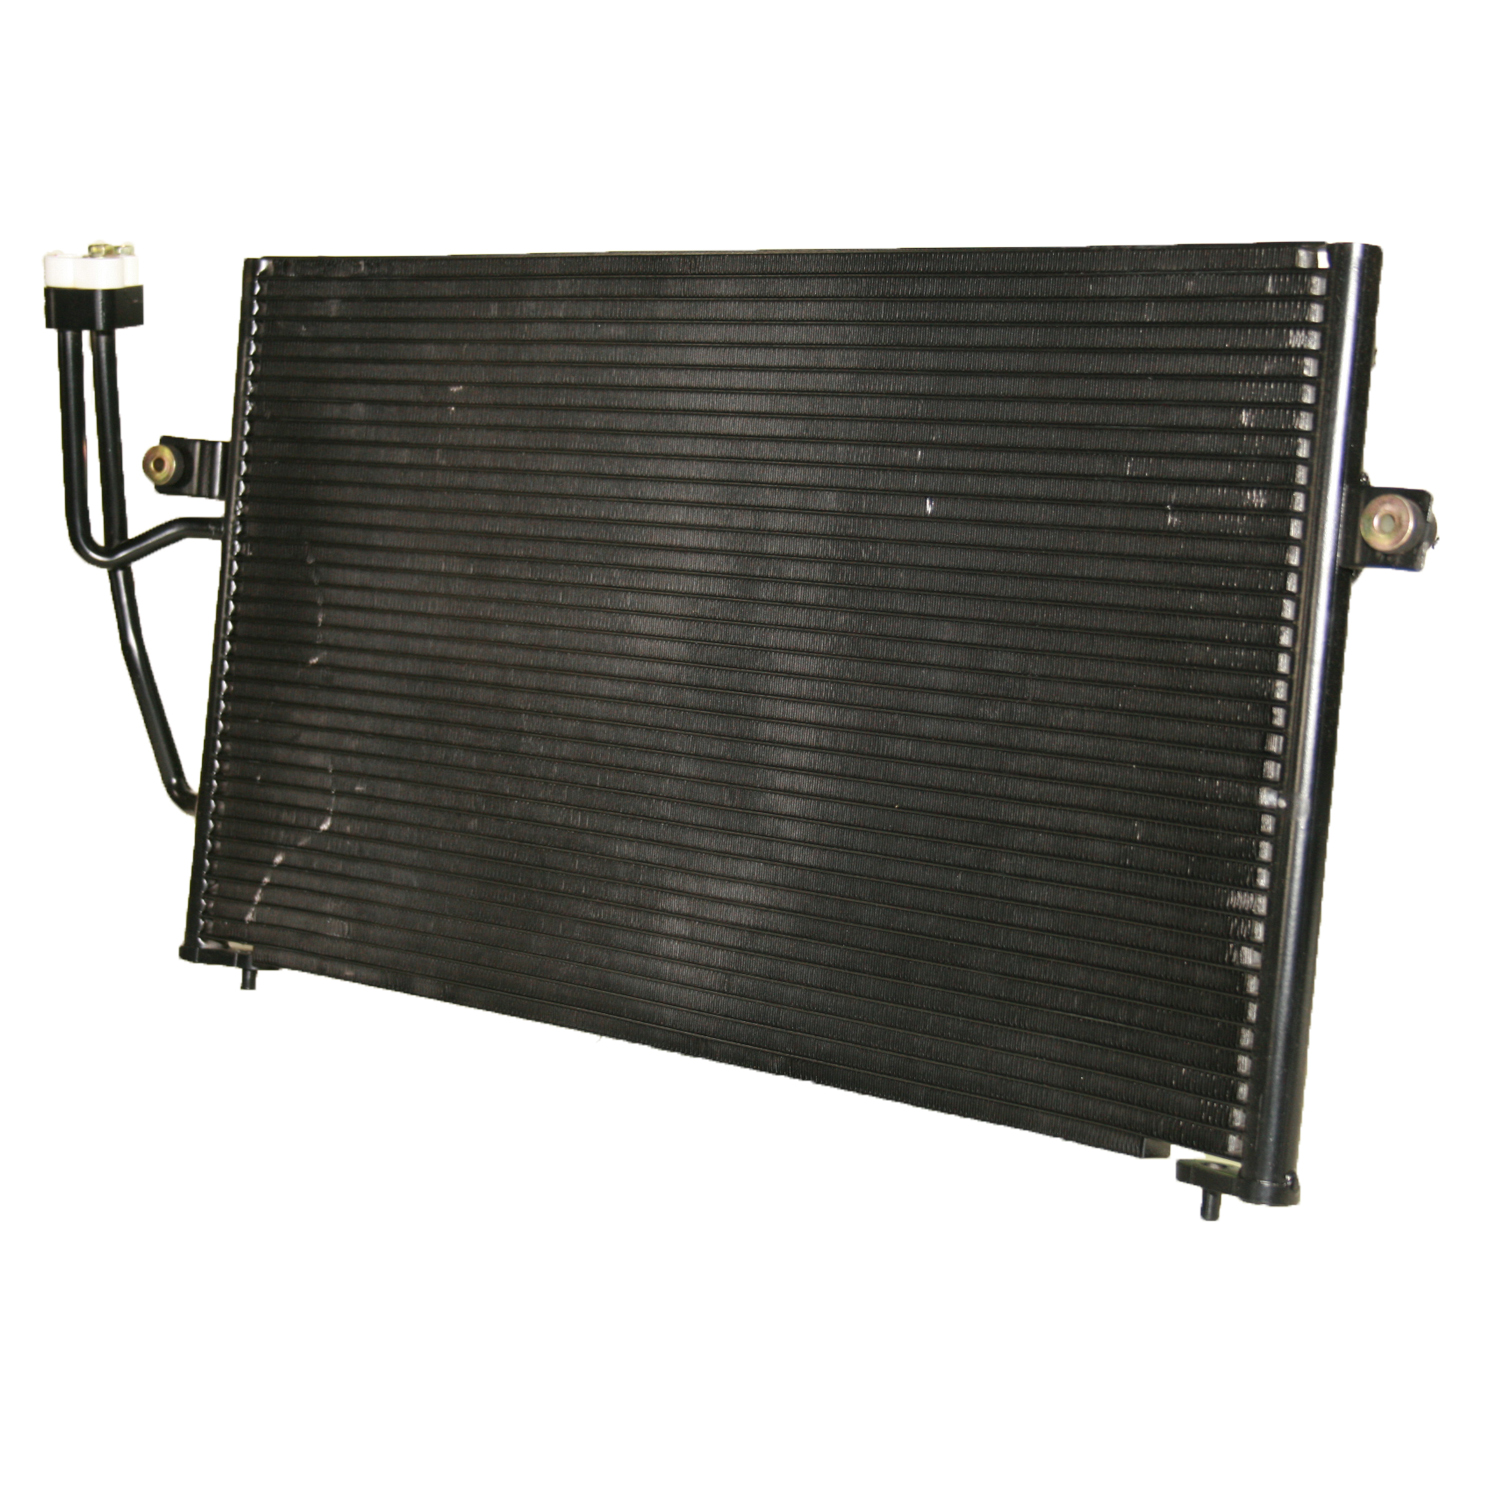 TCW Condenser 44-3074 New Product Image field_60b6a13a6e67c